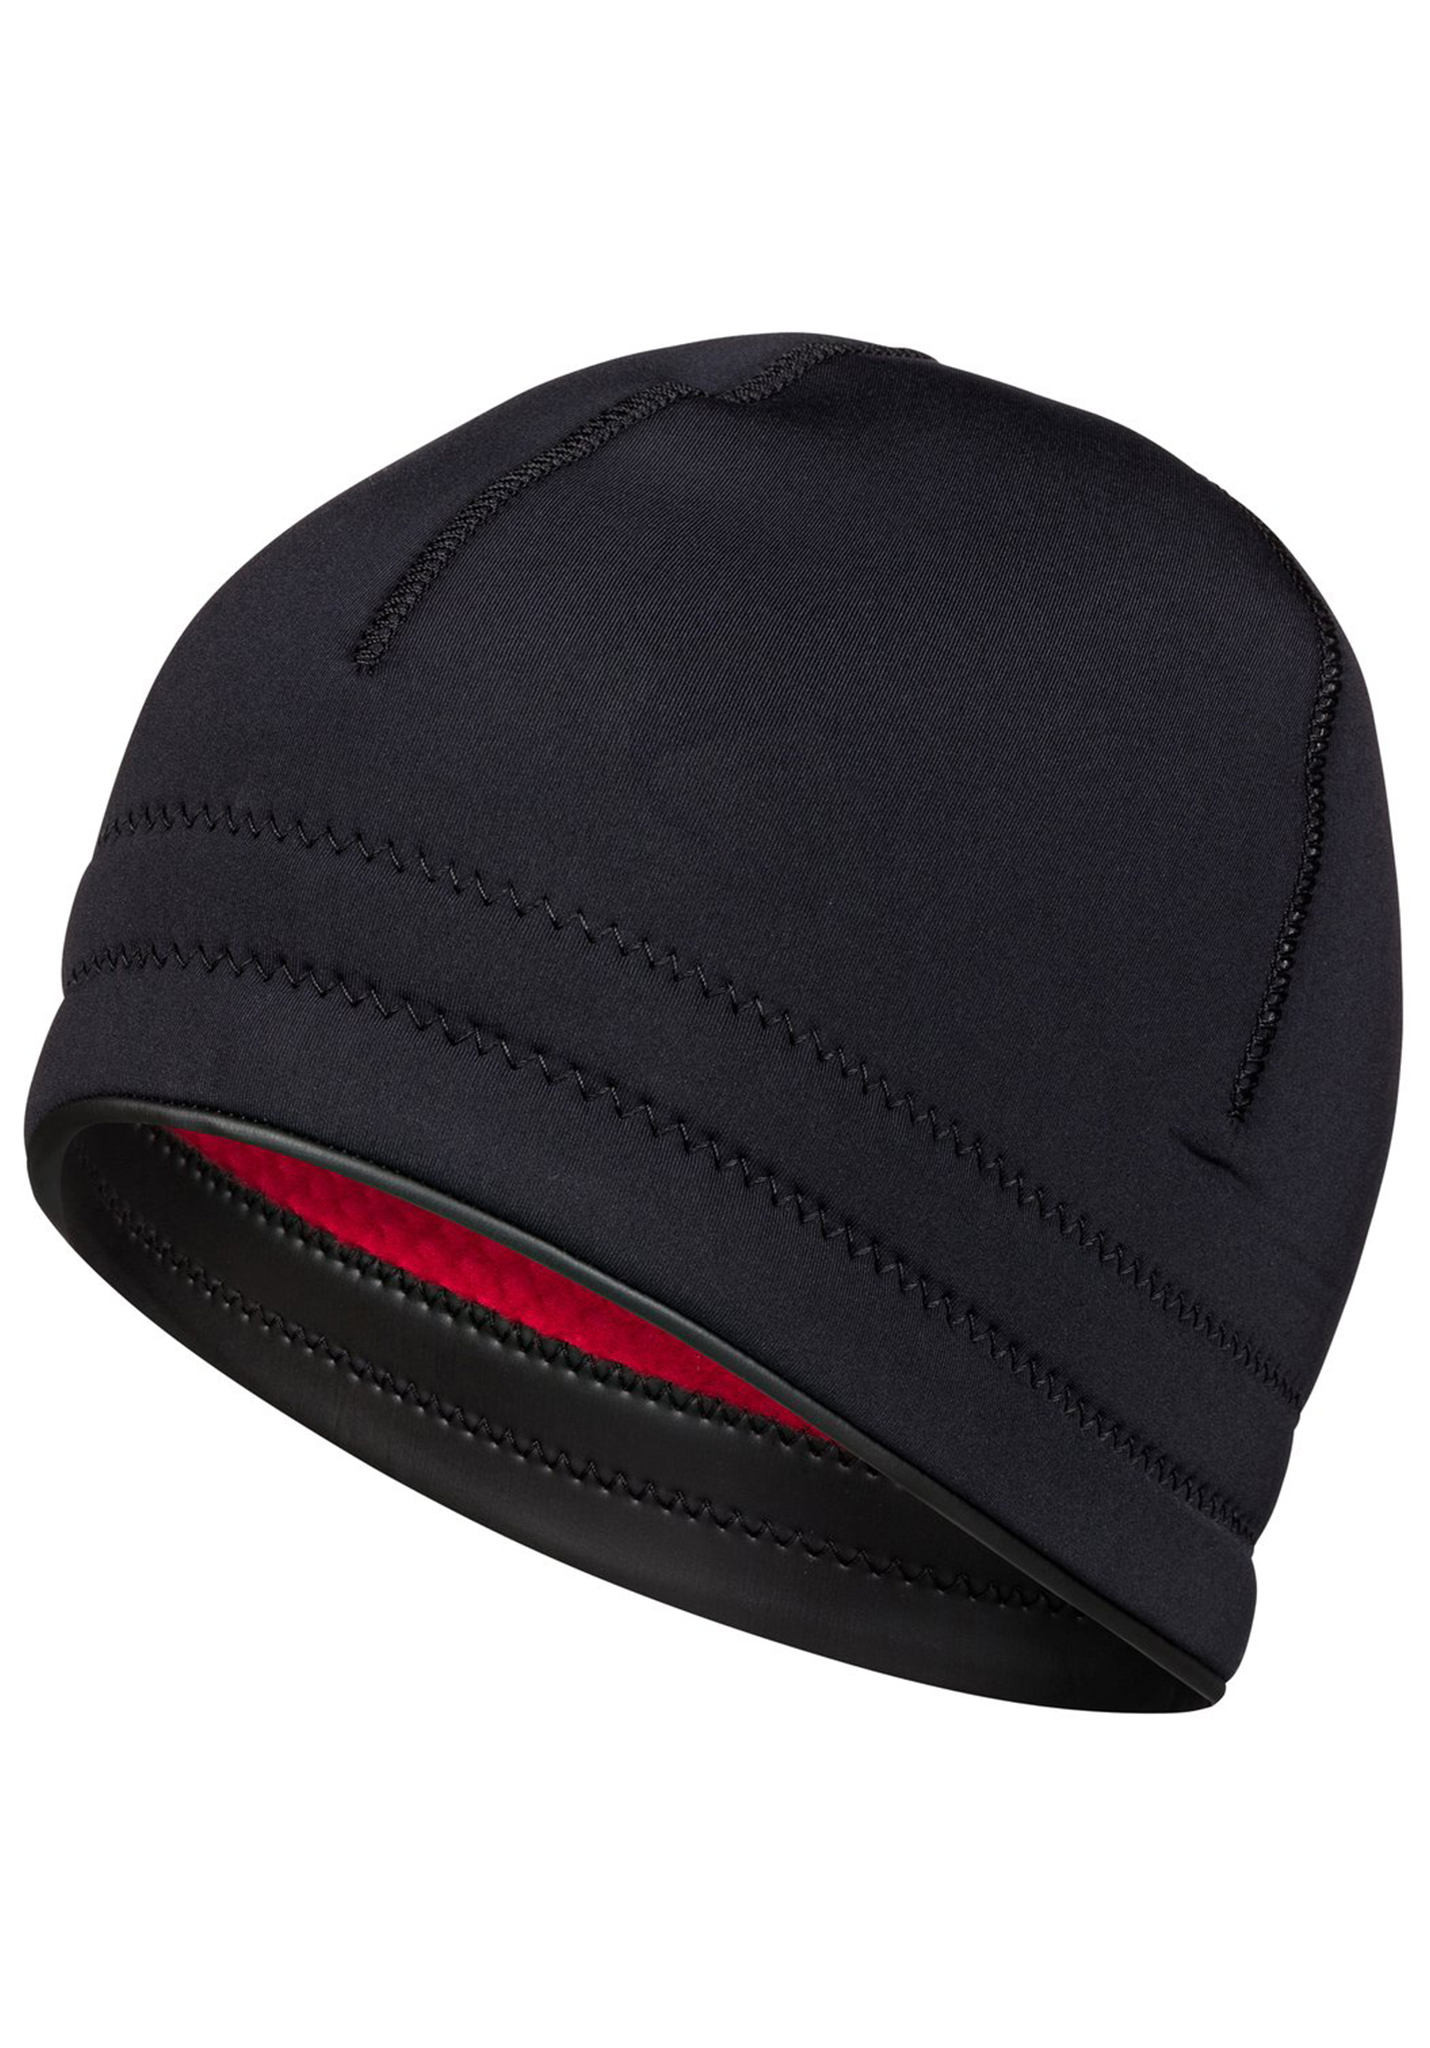 Quiksilver Syncro 2mm Beanie Surf Sonstiges black S